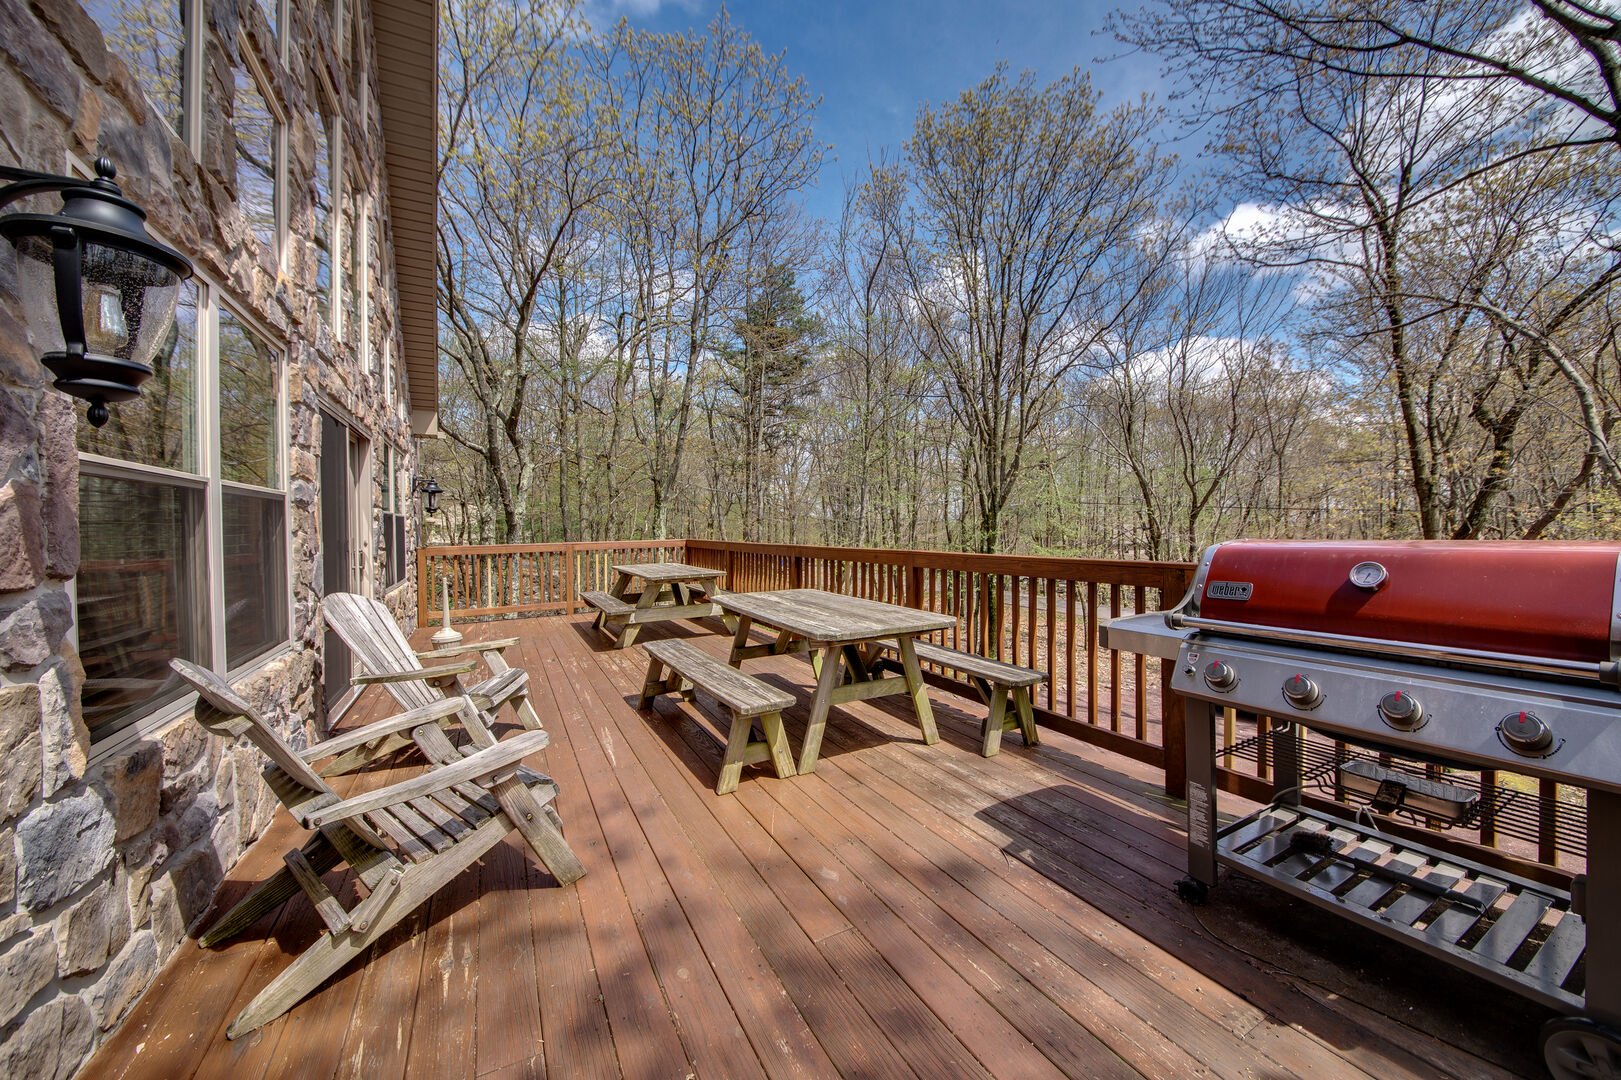 A Large Deck With Adirondak Chairs, Picnic Tables, and a Gas Grill.